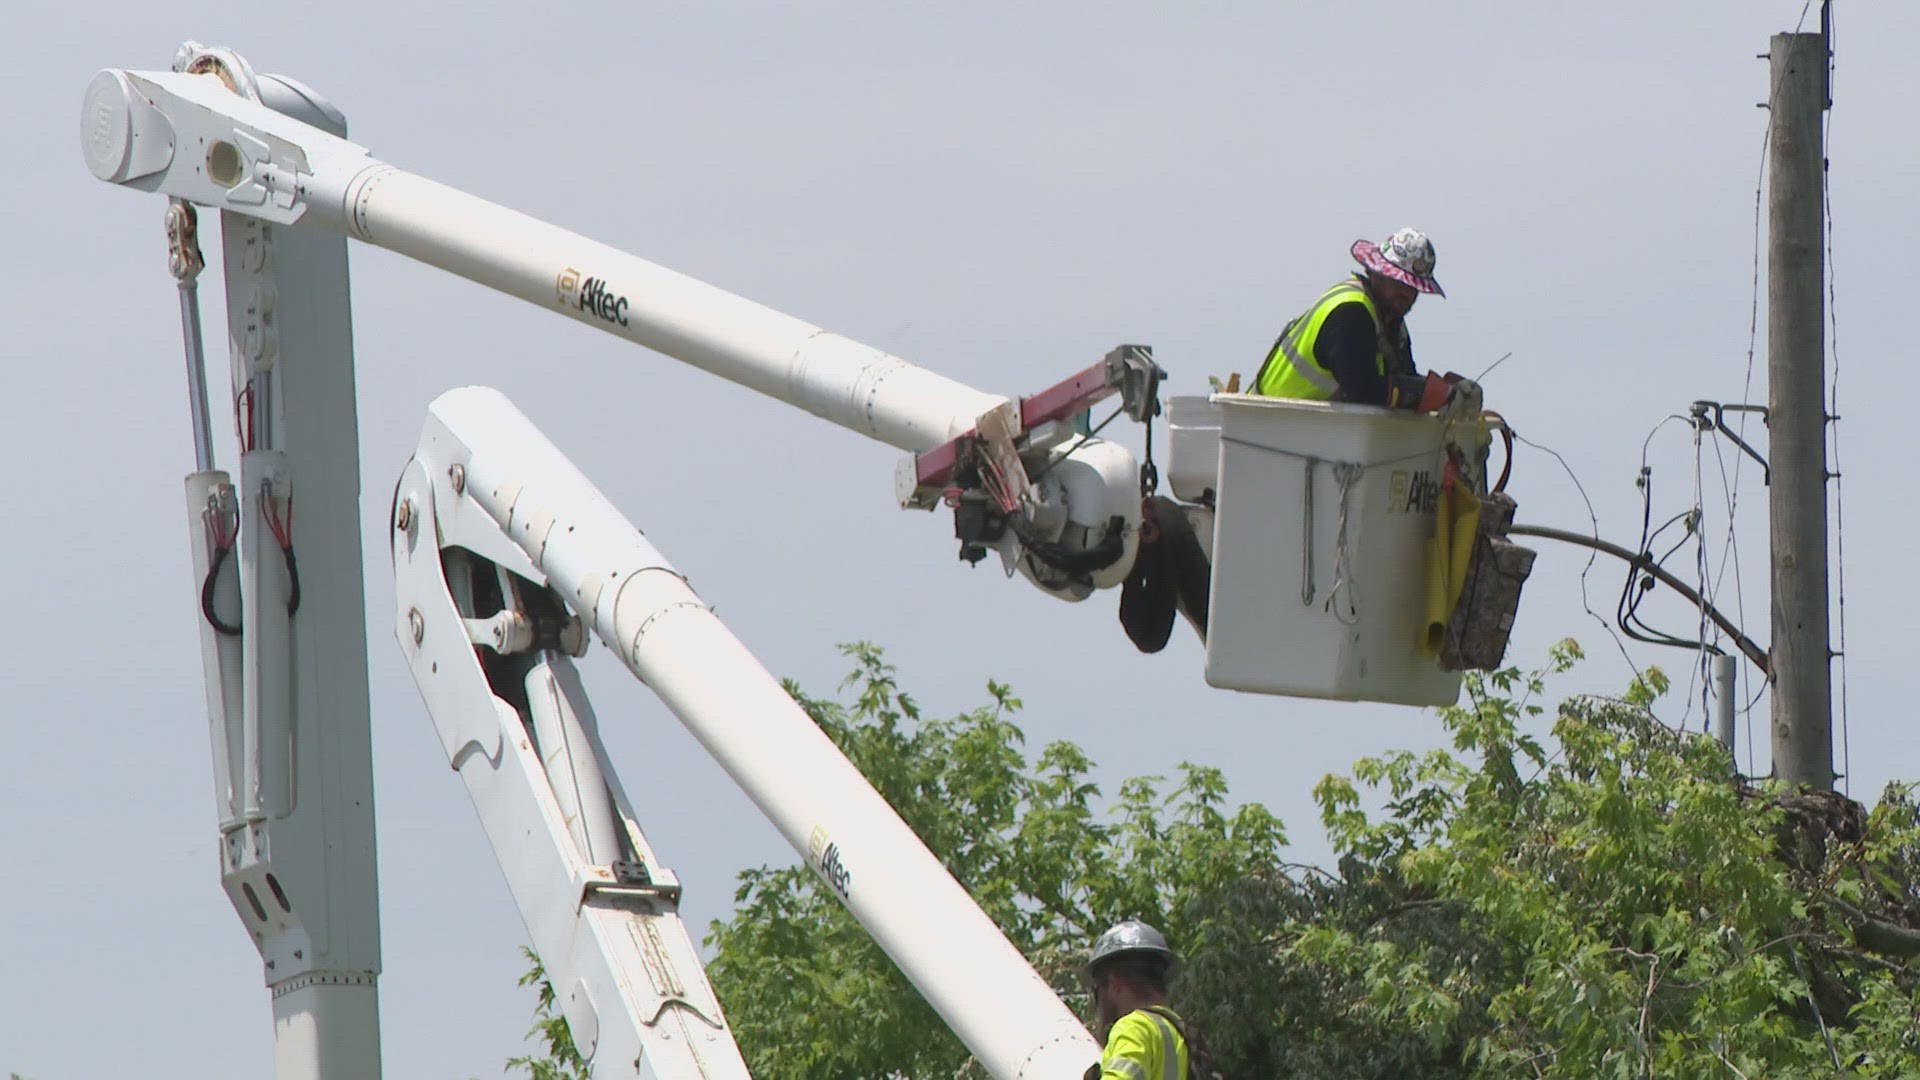 Recent storms damaged the power infrastructure. 
Thousands of Ameren Missouri customers remain without air conditioning during the hottest days of the year.